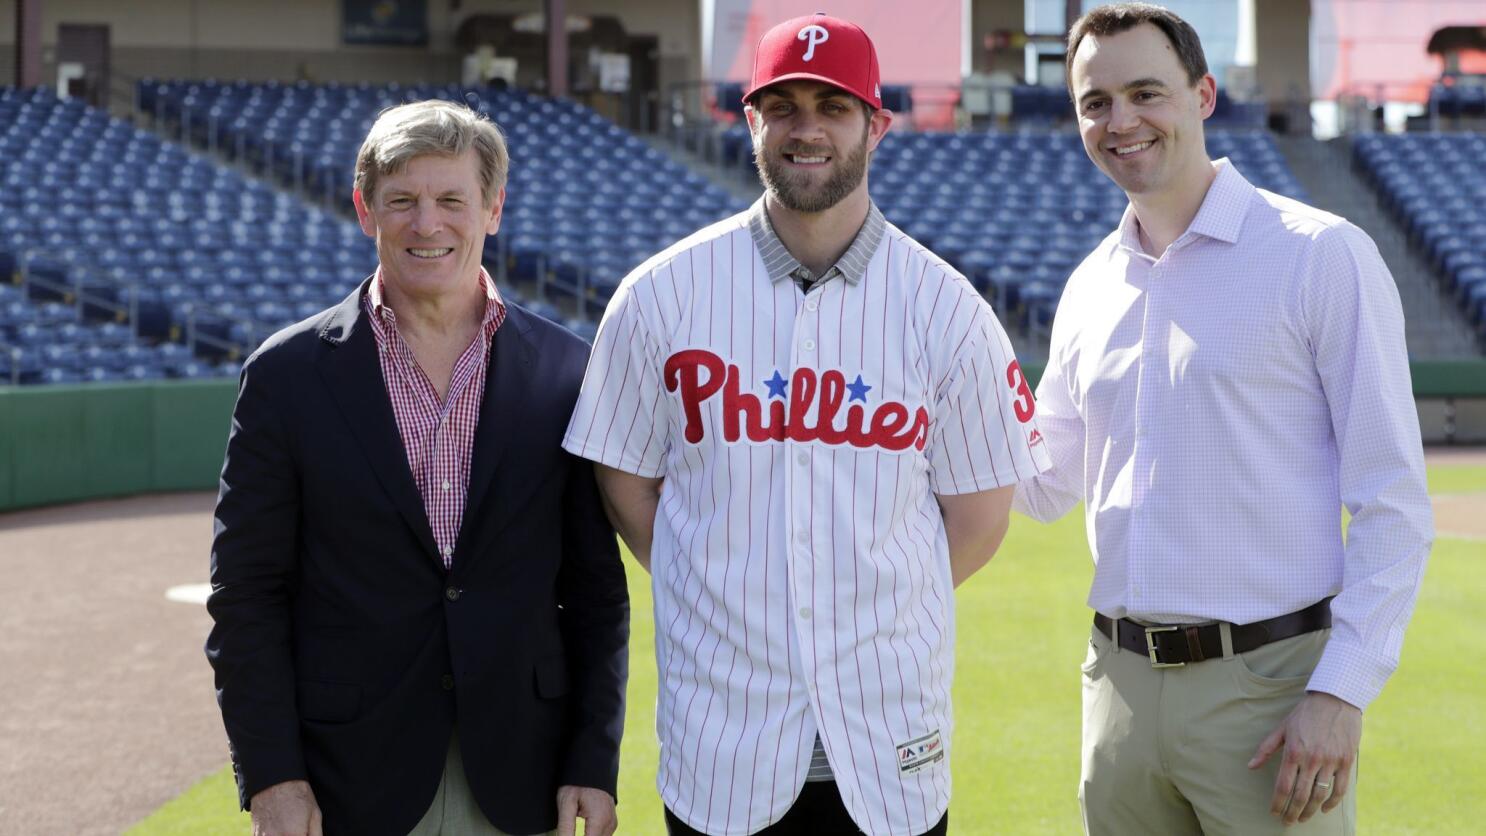 Bryce Harper Career Stats: A look at the Phillies Star's